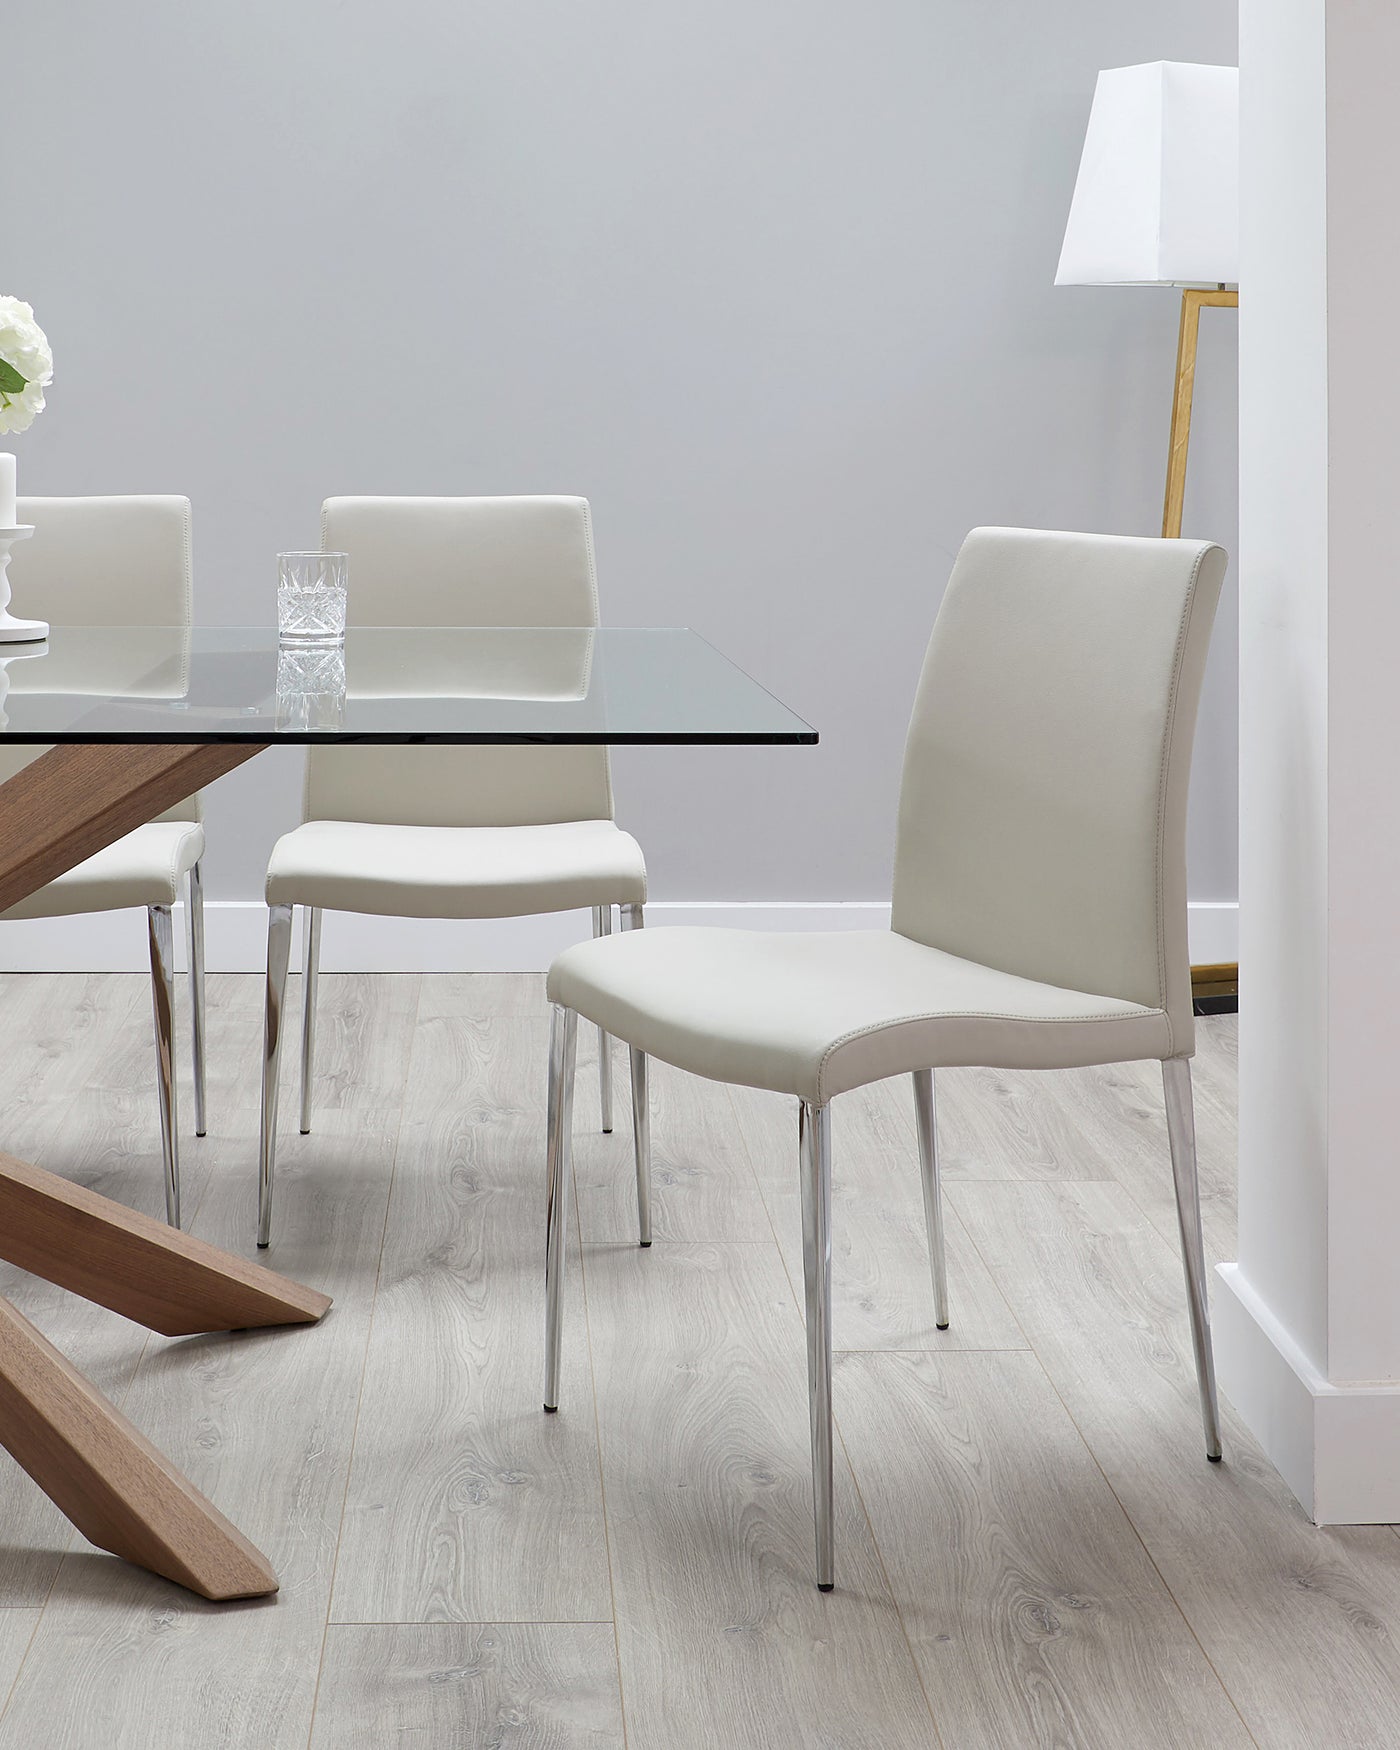 Modern dining set with a rectangular glass-top table on a wooden frame, surrounded by four sleek, white upholstered chairs with metal legs. A minimalist white floor lamp stands in the background.